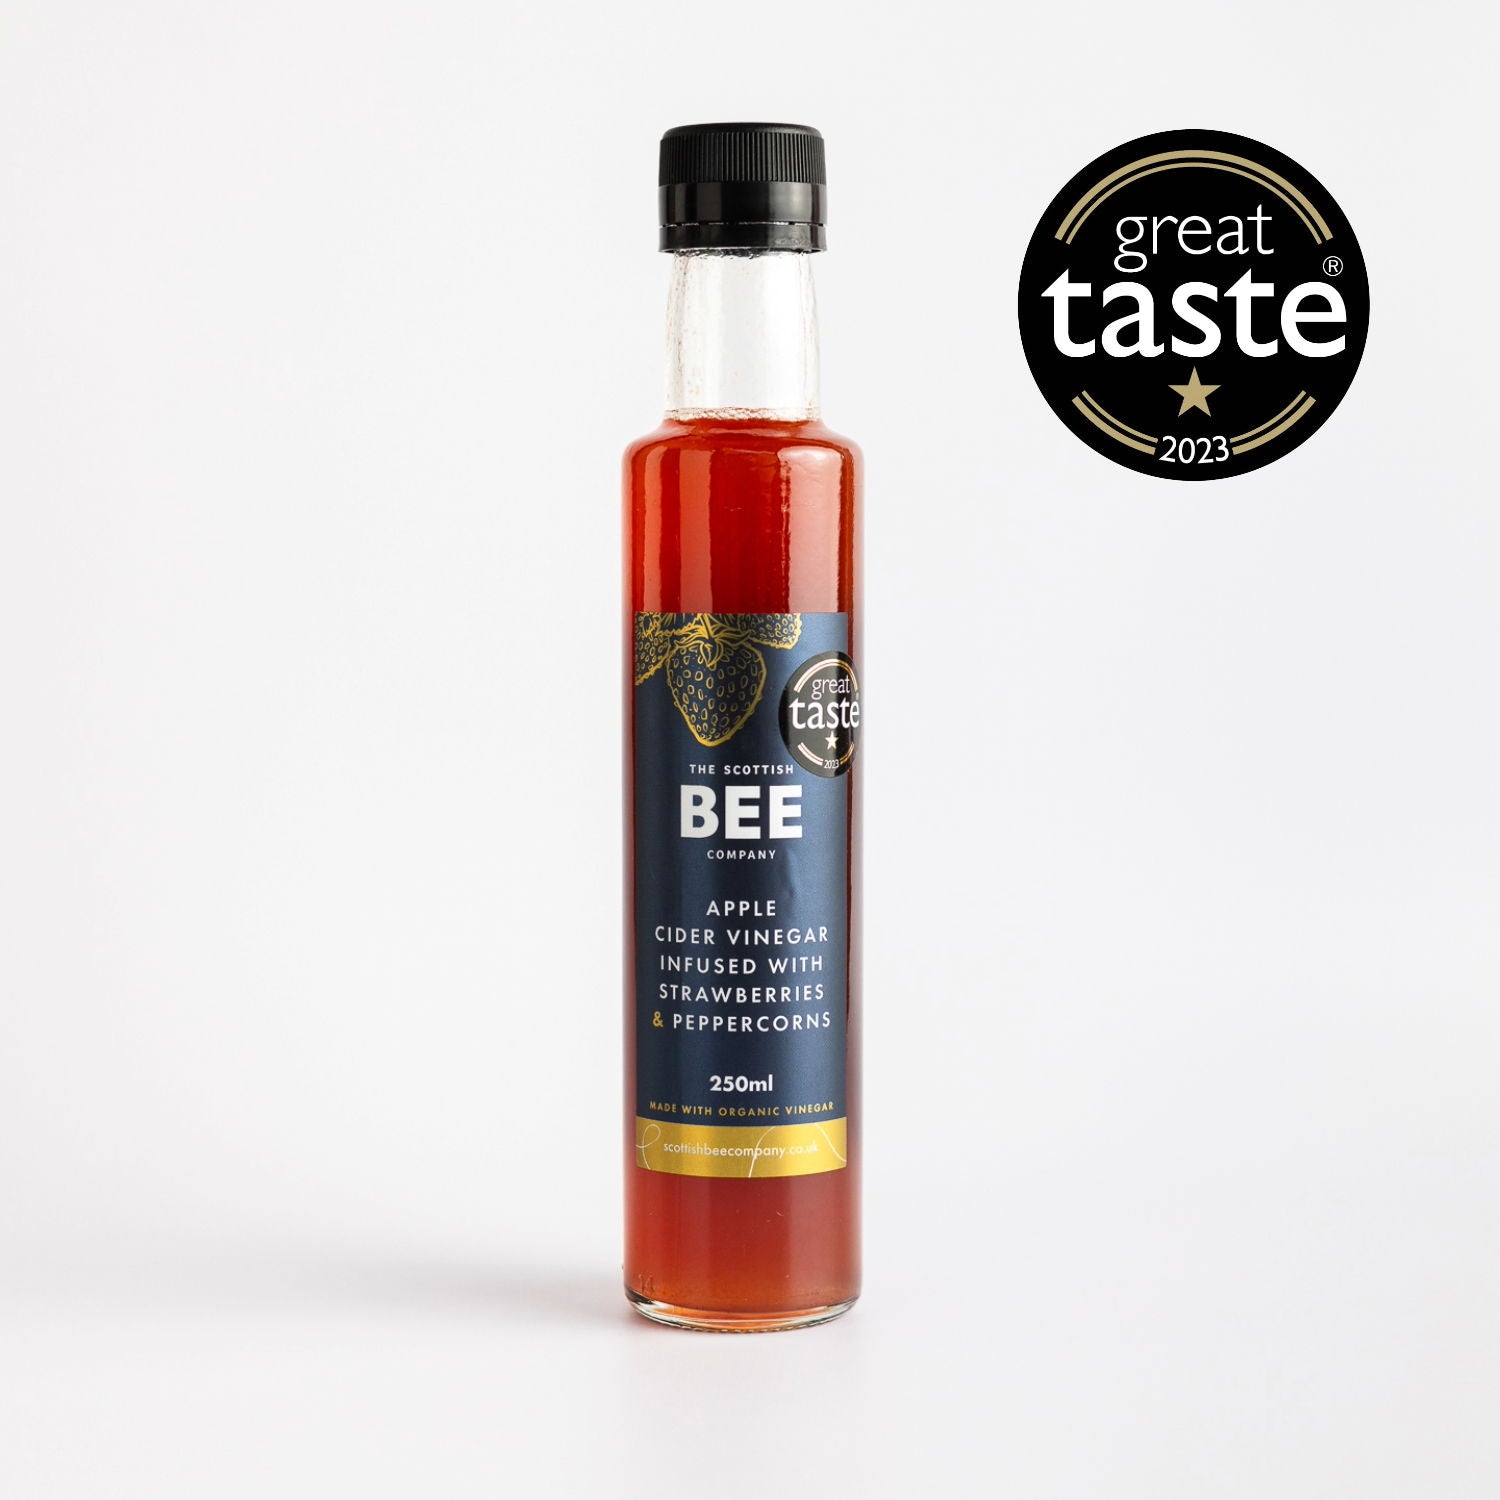 Scottish Bee Company Apple Cider Vinegar Infused with Strawberries &amp; Peppercorns